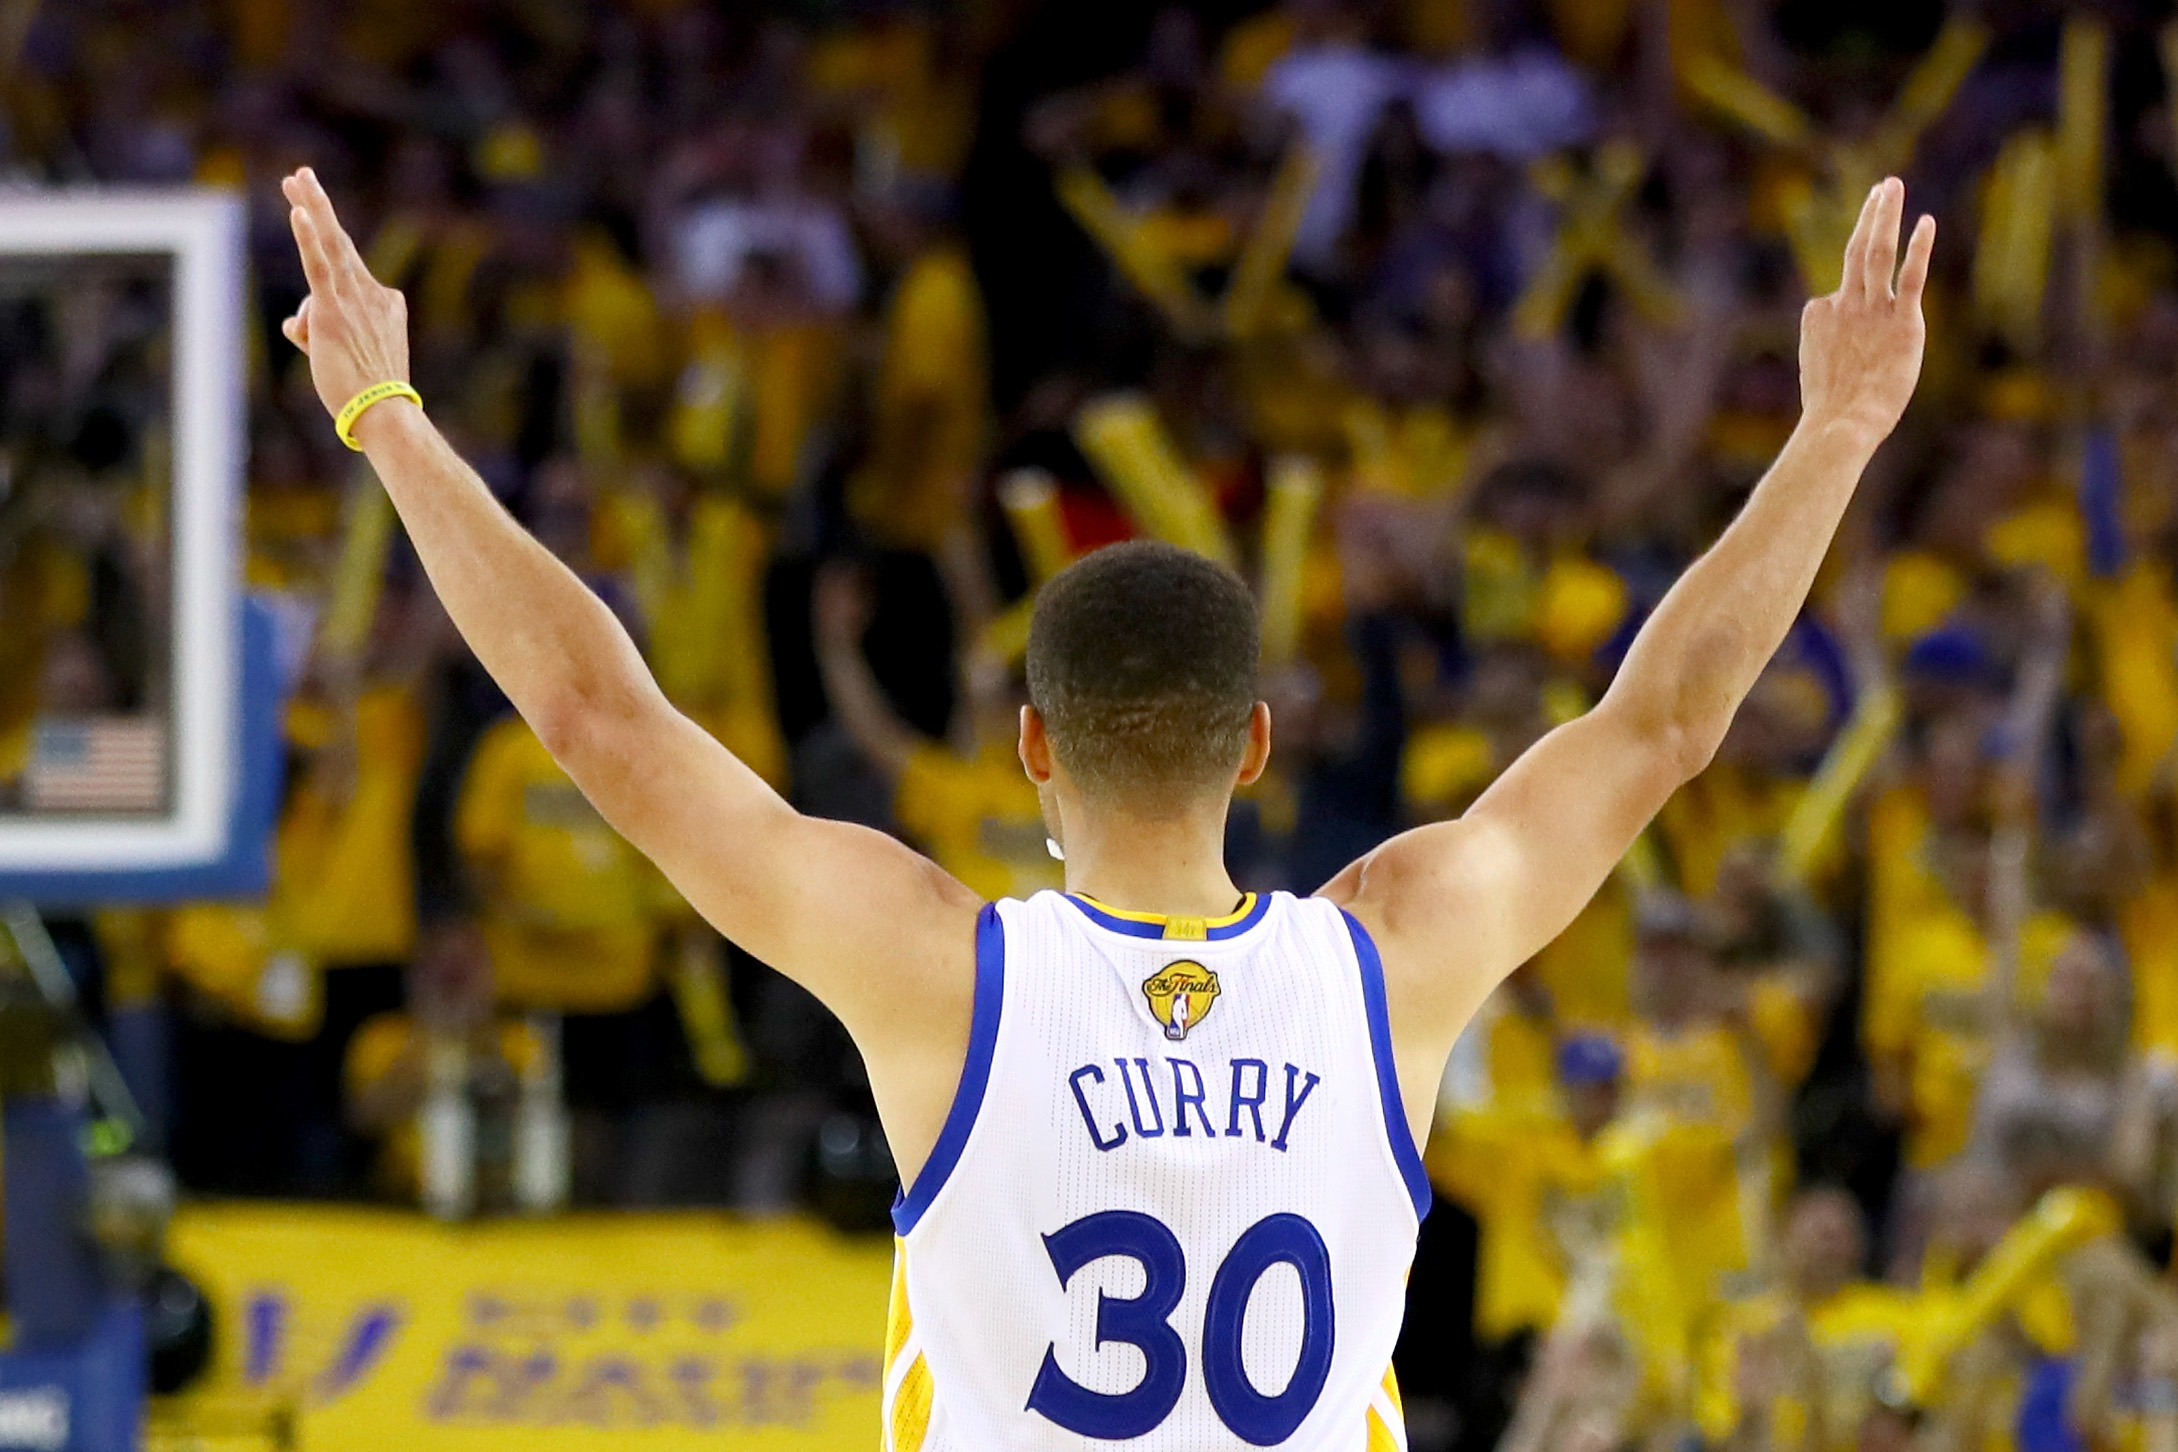 OAKLAND, CA - JUNE 19: Stephen Curry #30 of the Golden State Warriors reacts after scoring a three-point basket against the Cleveland Cavaliers in Game 7 of the 2016 NBA Finals at ORACLE Arena on June 19, 2016 in Oakland, California. NOTE TO USER: User expressly acknowledges and agrees that, by downloading and or using this photograph, User is consenting to the terms and conditions of the Getty Images License Agreement.   Ezra Shaw/Getty Images/AFP